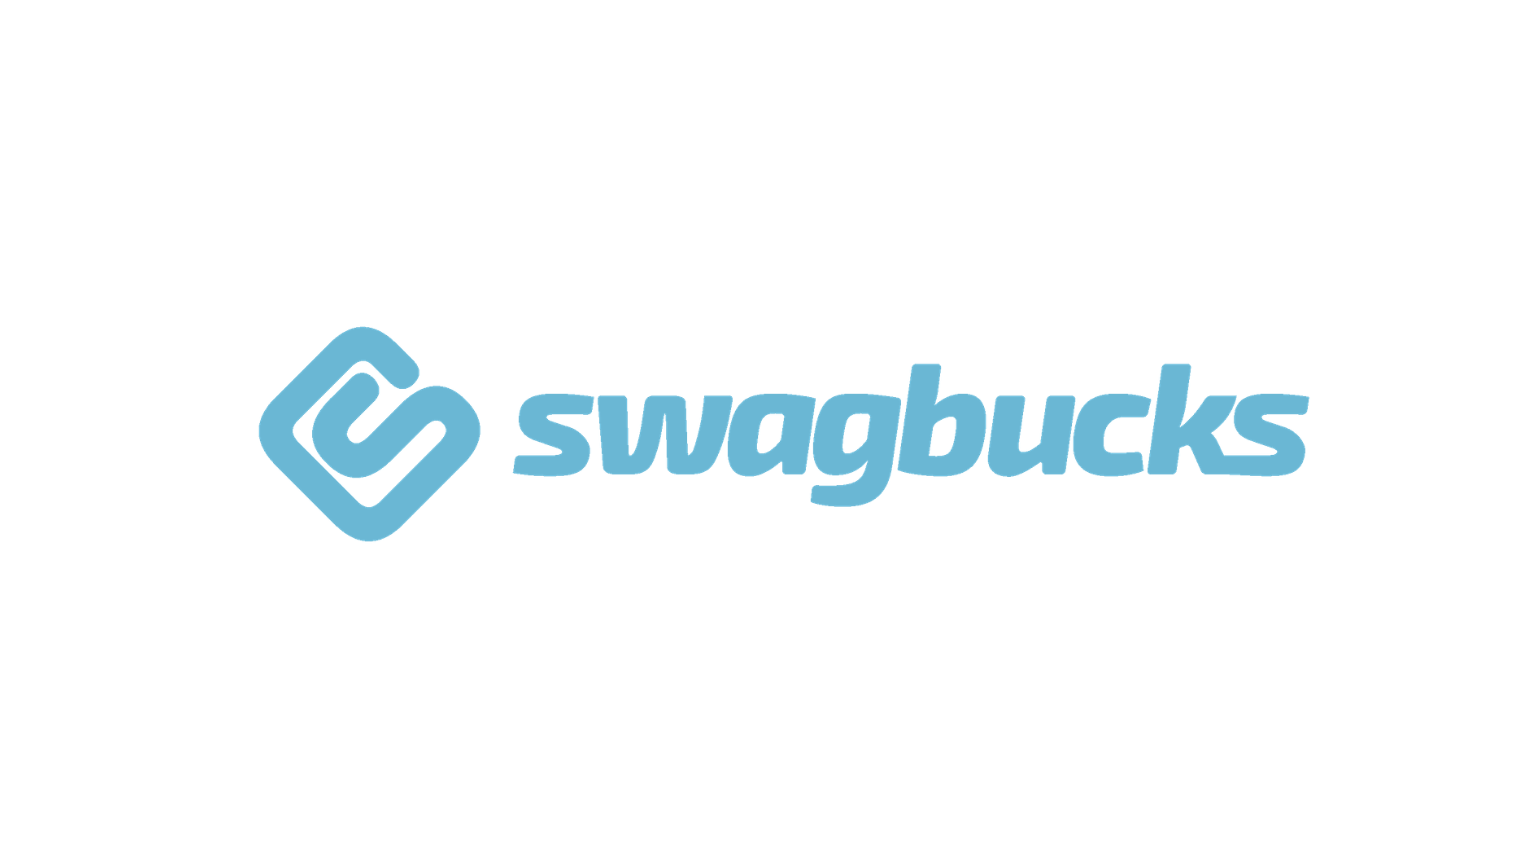 Swagbucks - Find Out How to Win Free Gift Cards with this App